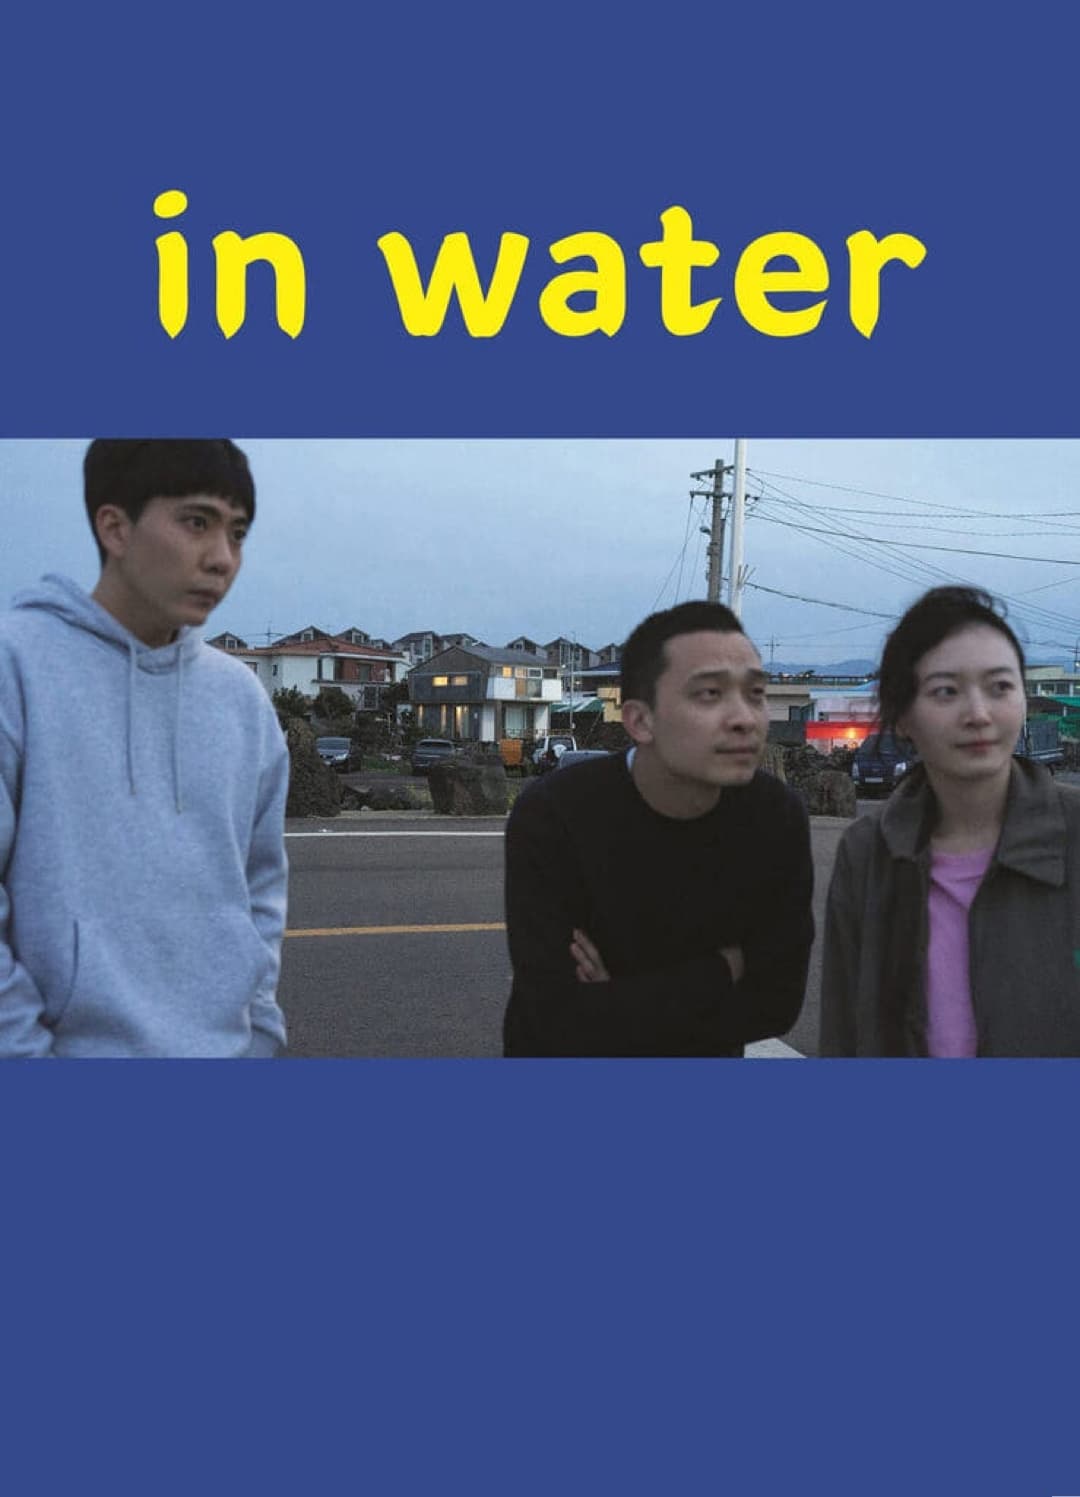 Poster for the movie "In Water"